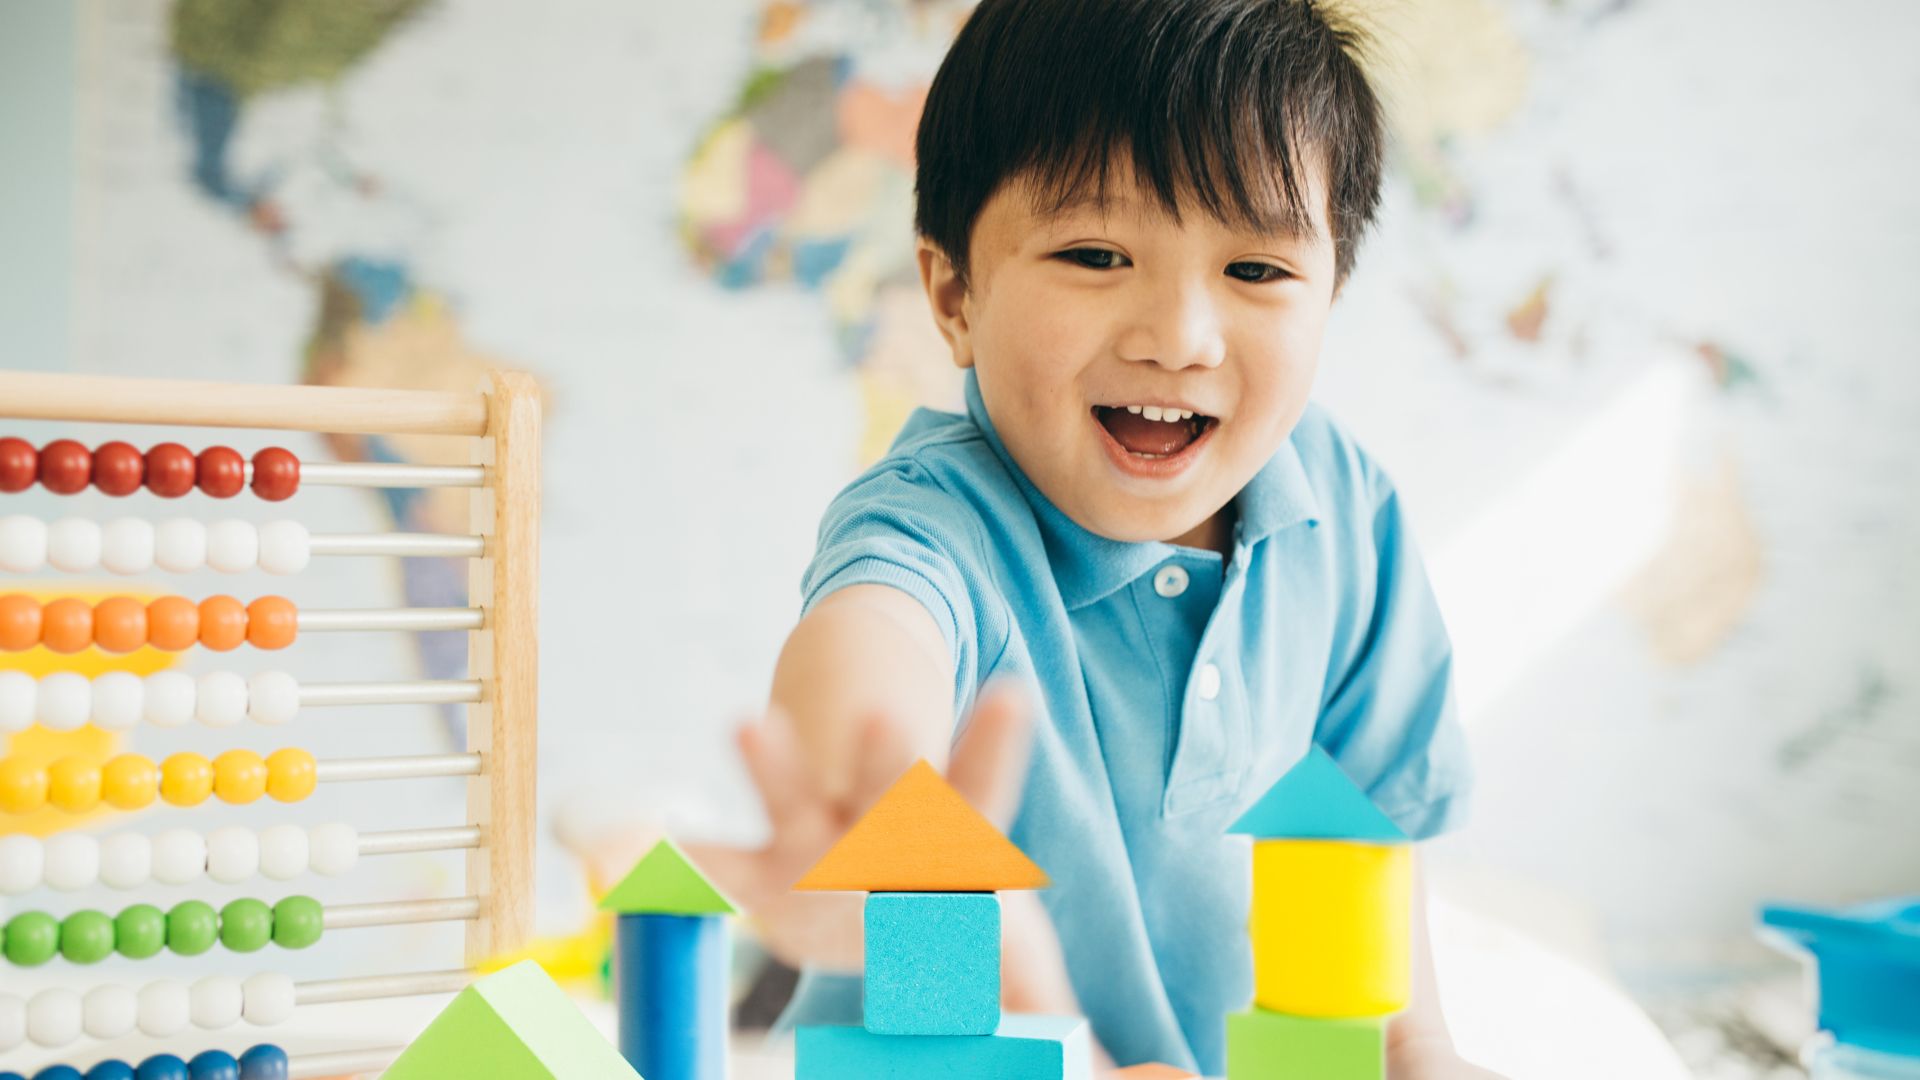 An image of a young boy reaching for colorful blocks.